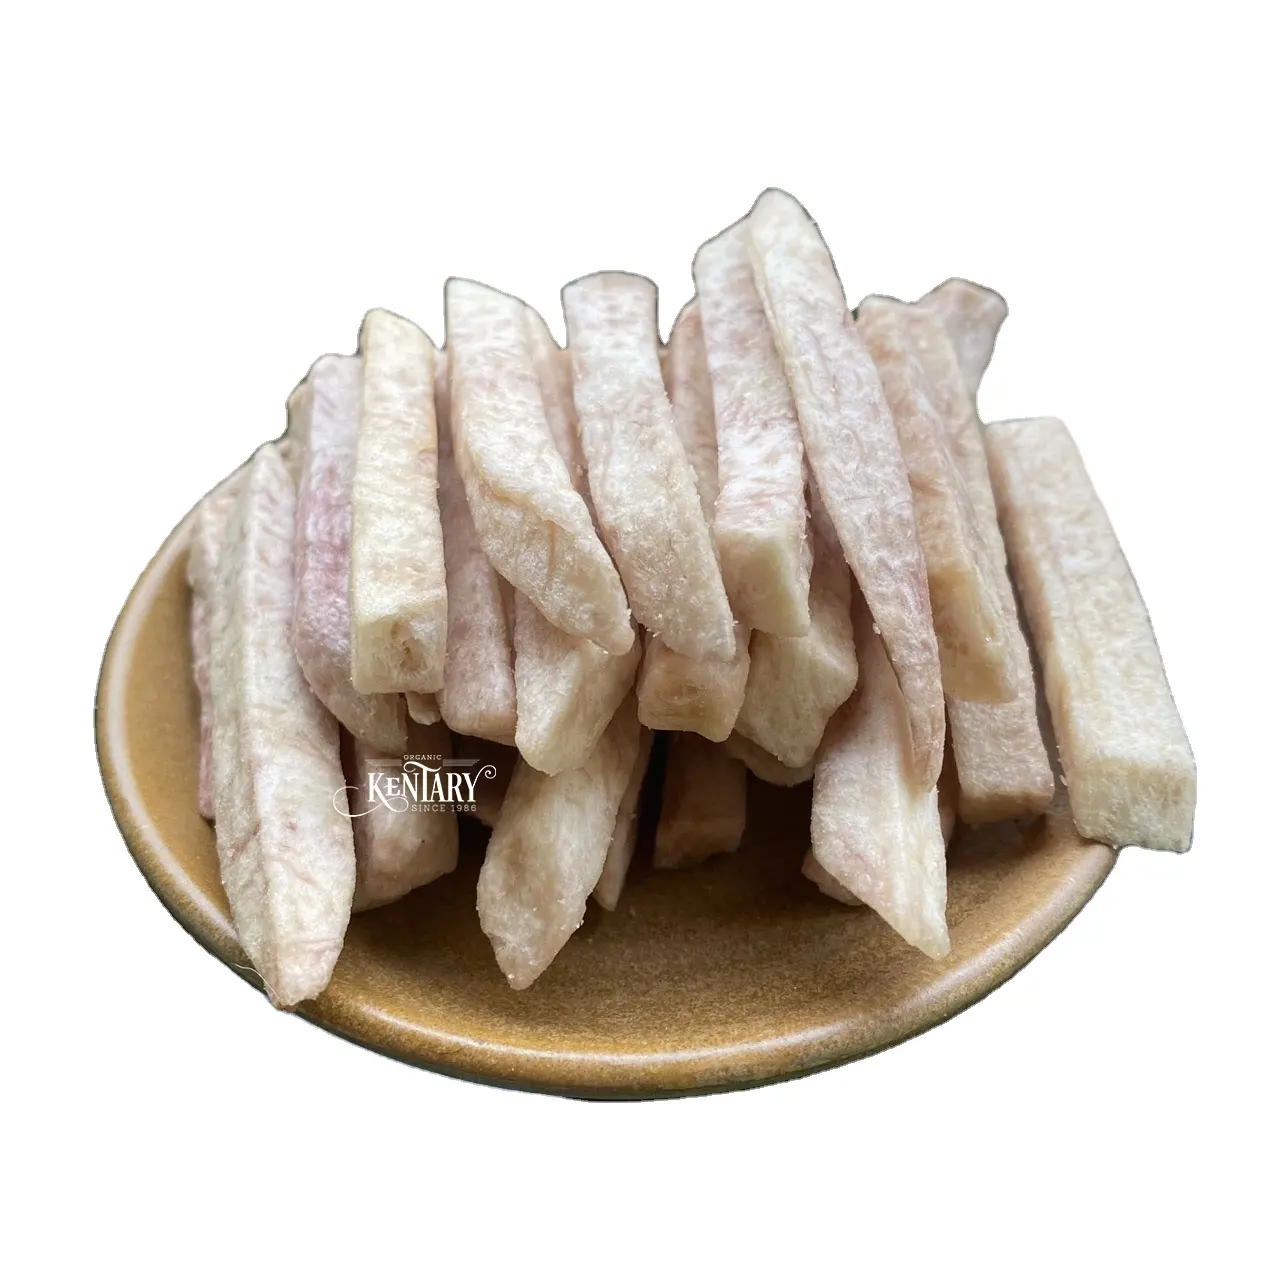 Bulk Fried Taro Root Chips Snack Slice Nature Tasty Hight Quality Best Price Made in Vietnam Wholesale Non GMO Good For Health